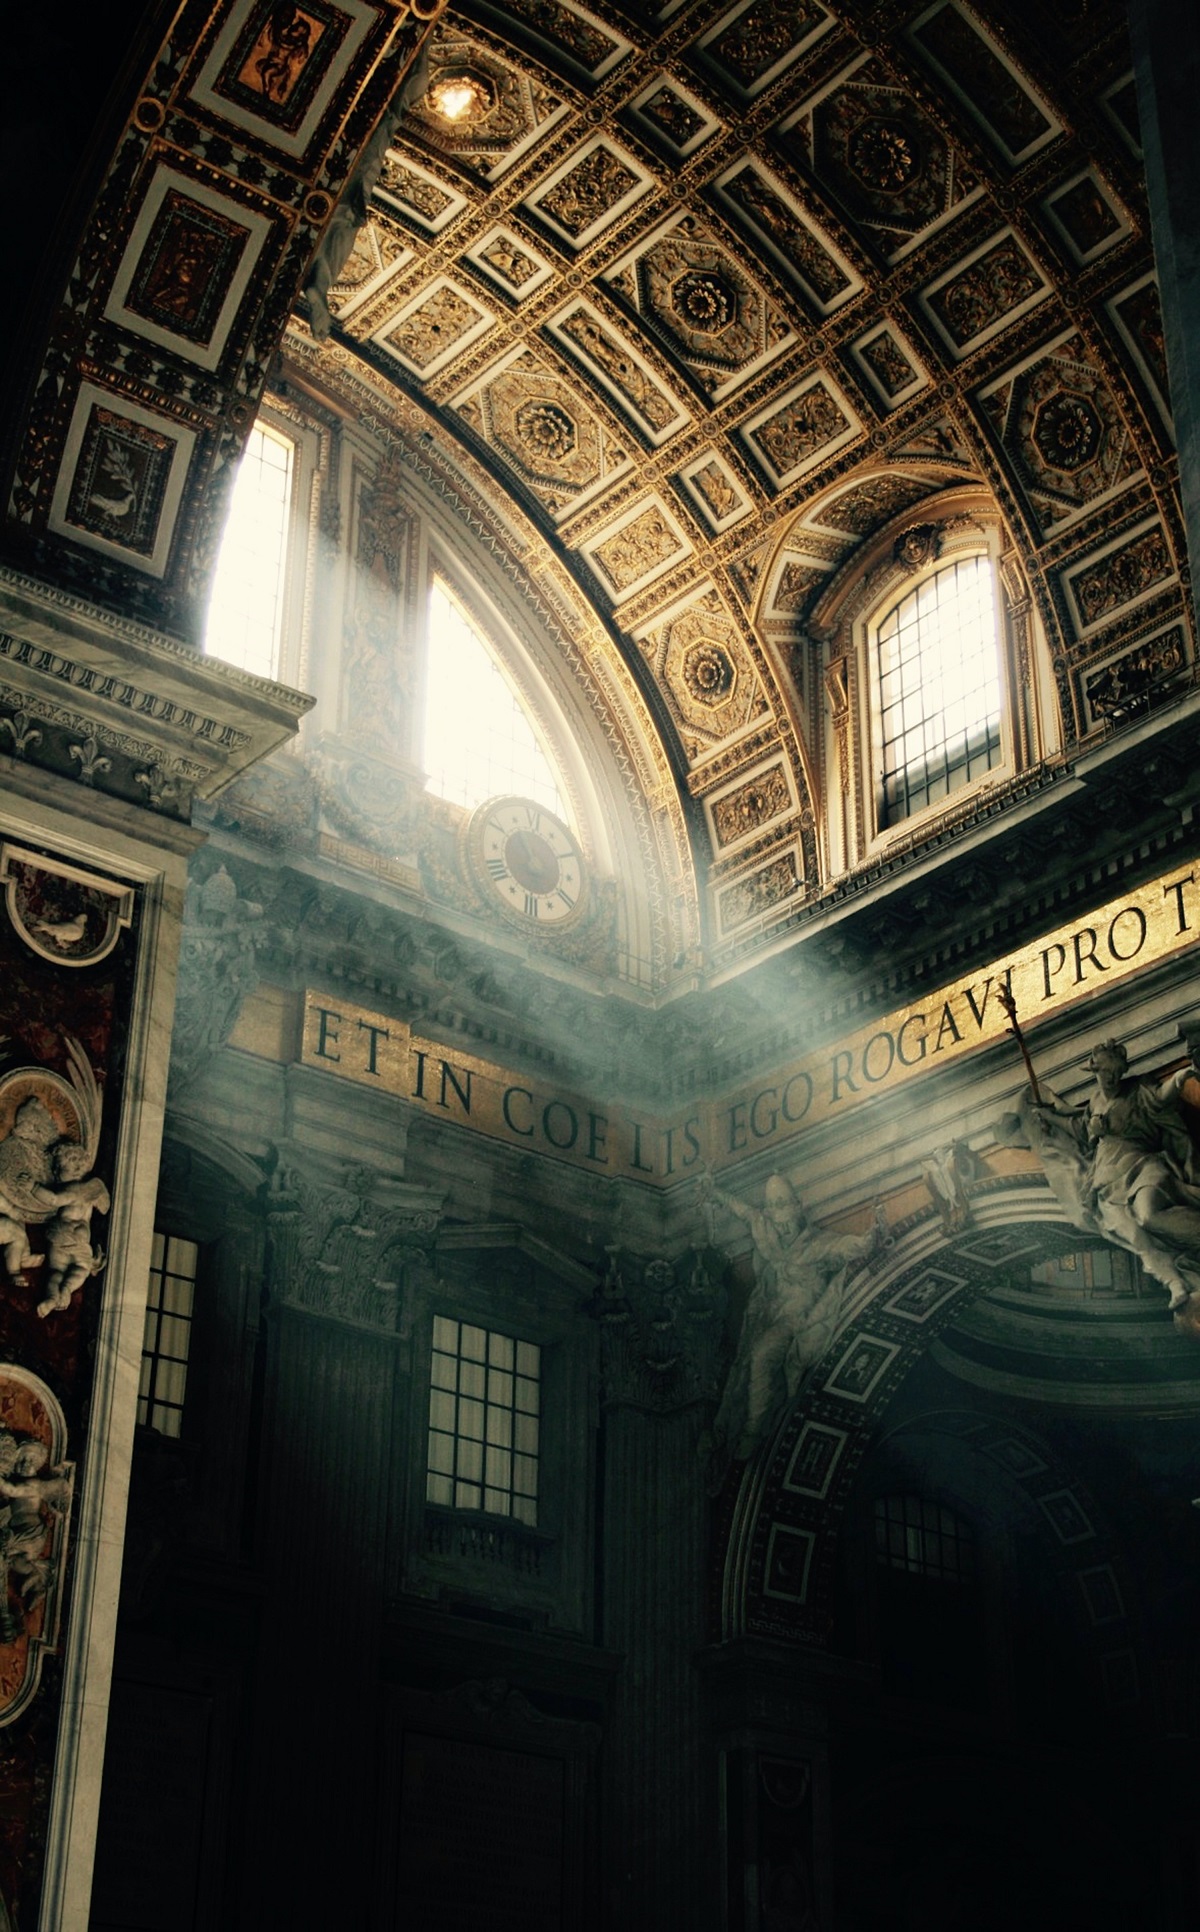 Sun pouring in through a gilded window in St. Peter's Basilica in the Vatican